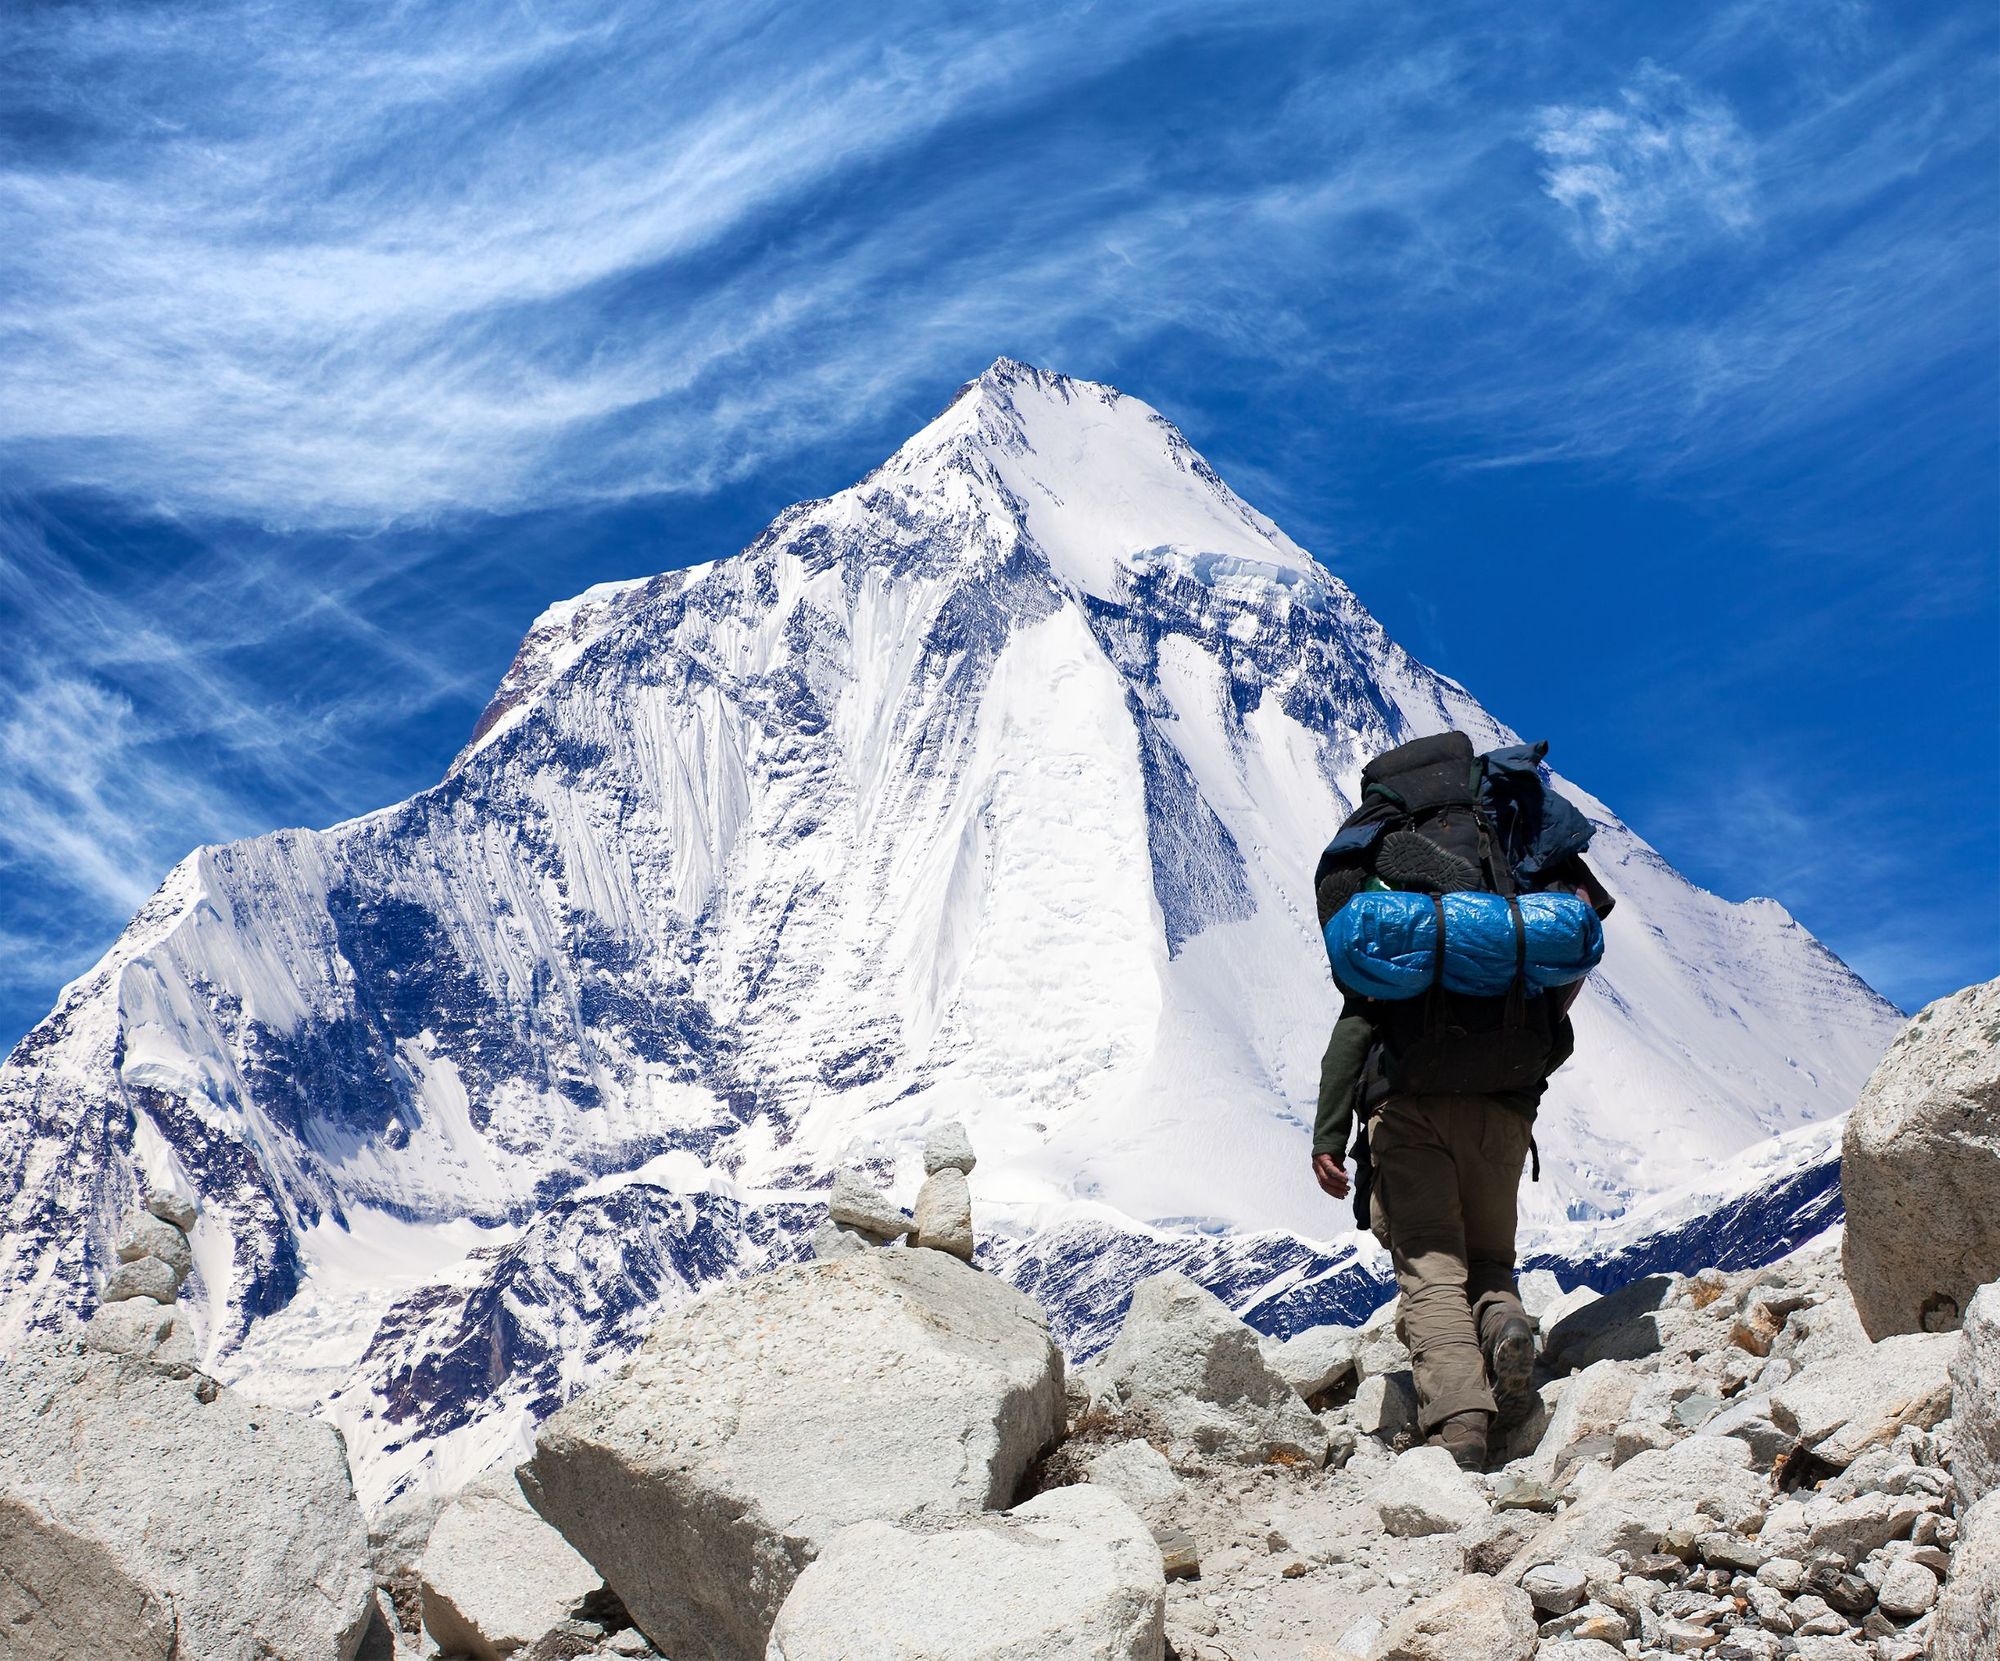 A hiker with a heavy backpack in the Himalayas